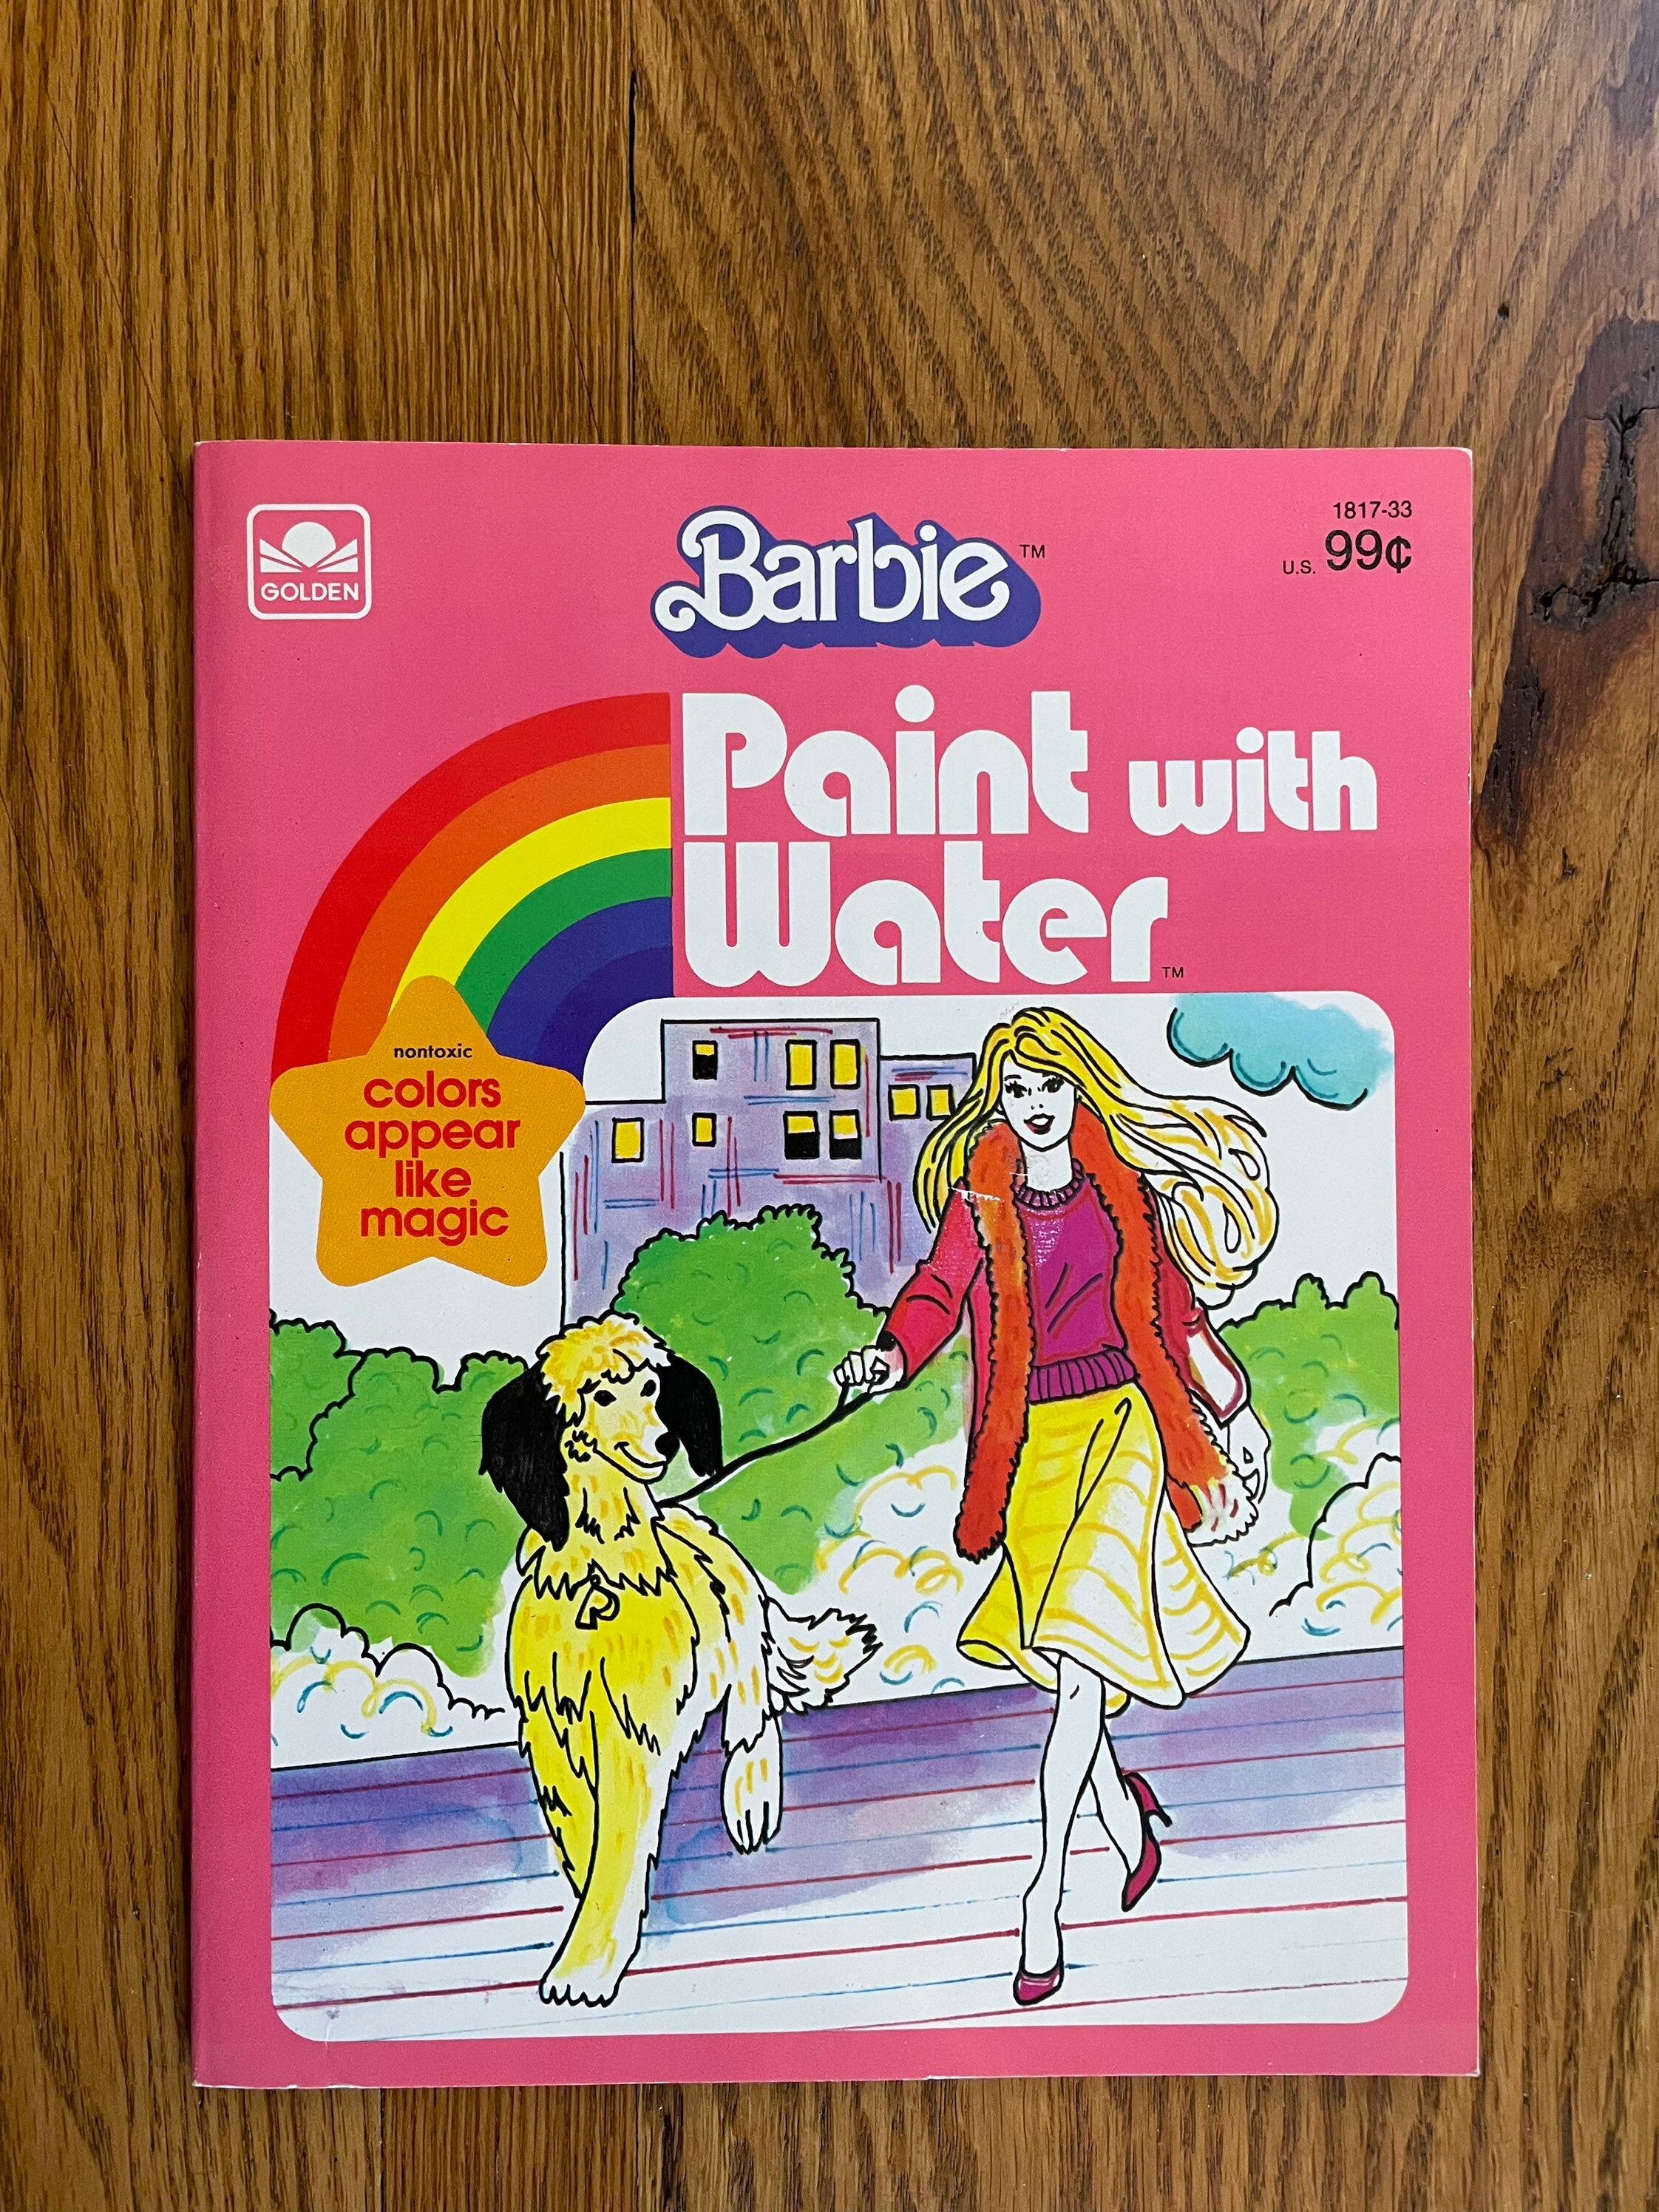 Vintage 1990 Barbie Giant Paint With Water Coloring Book